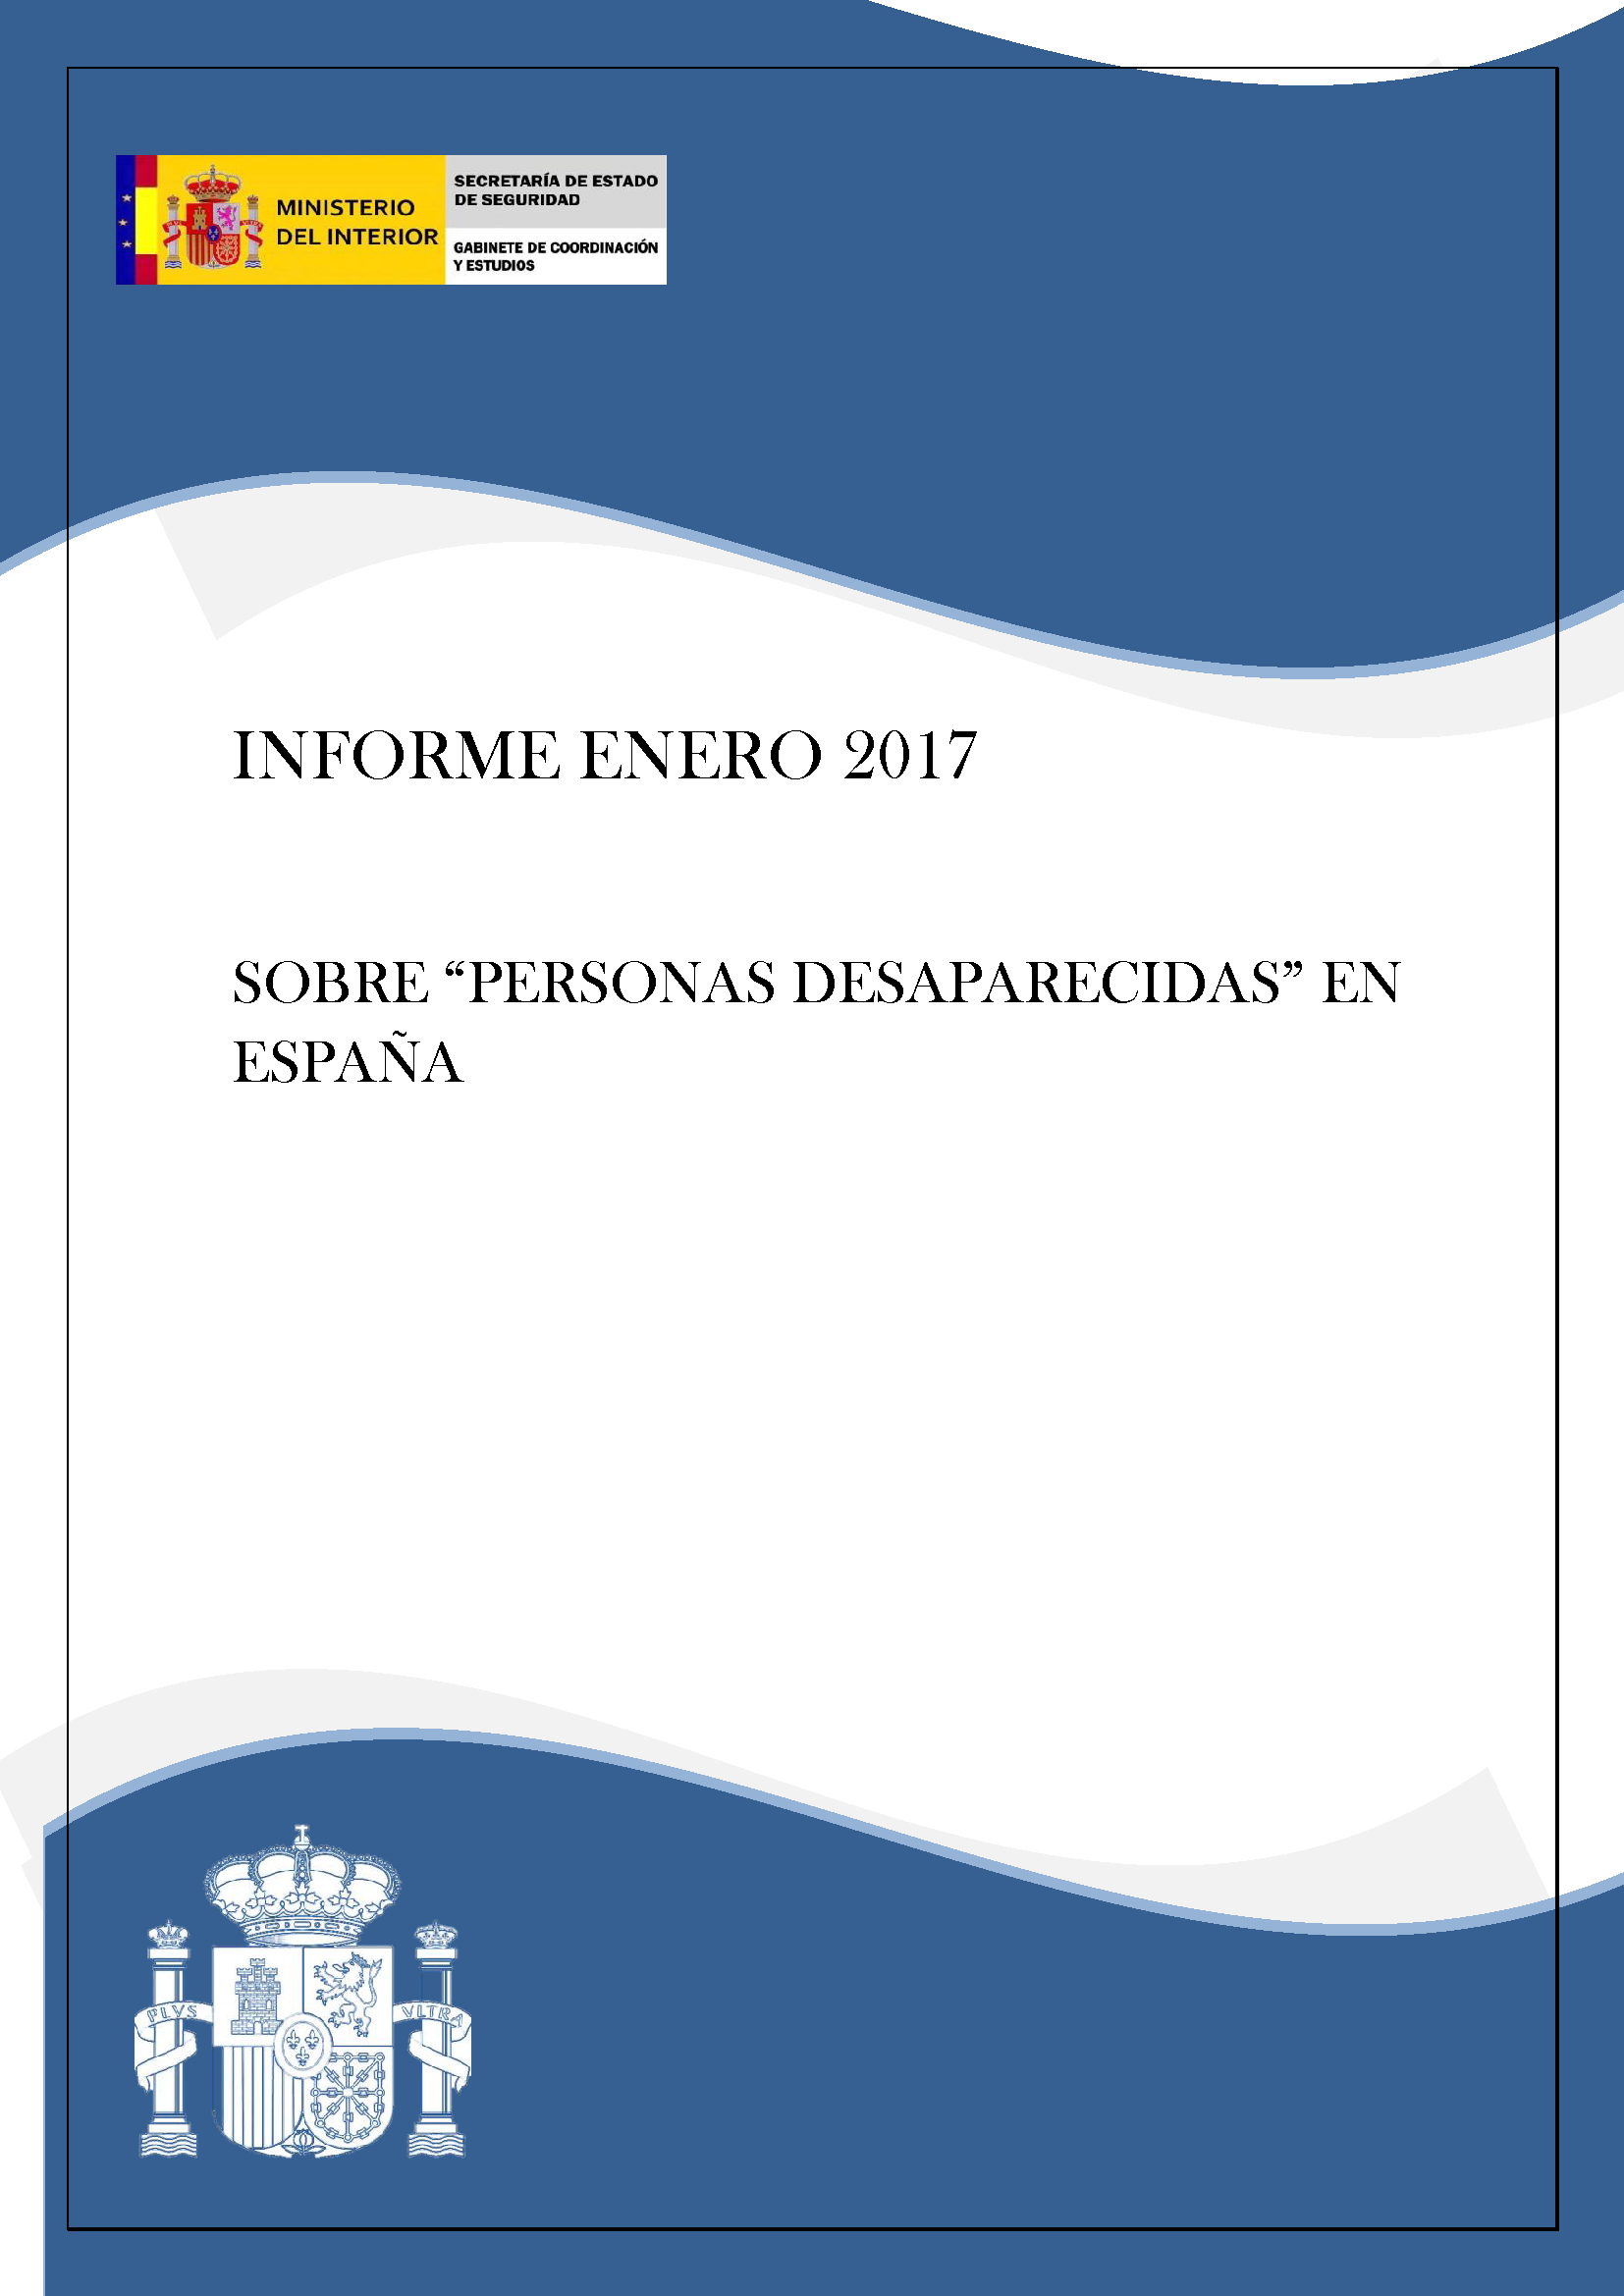 2017 Report on Missing Persons in Spain